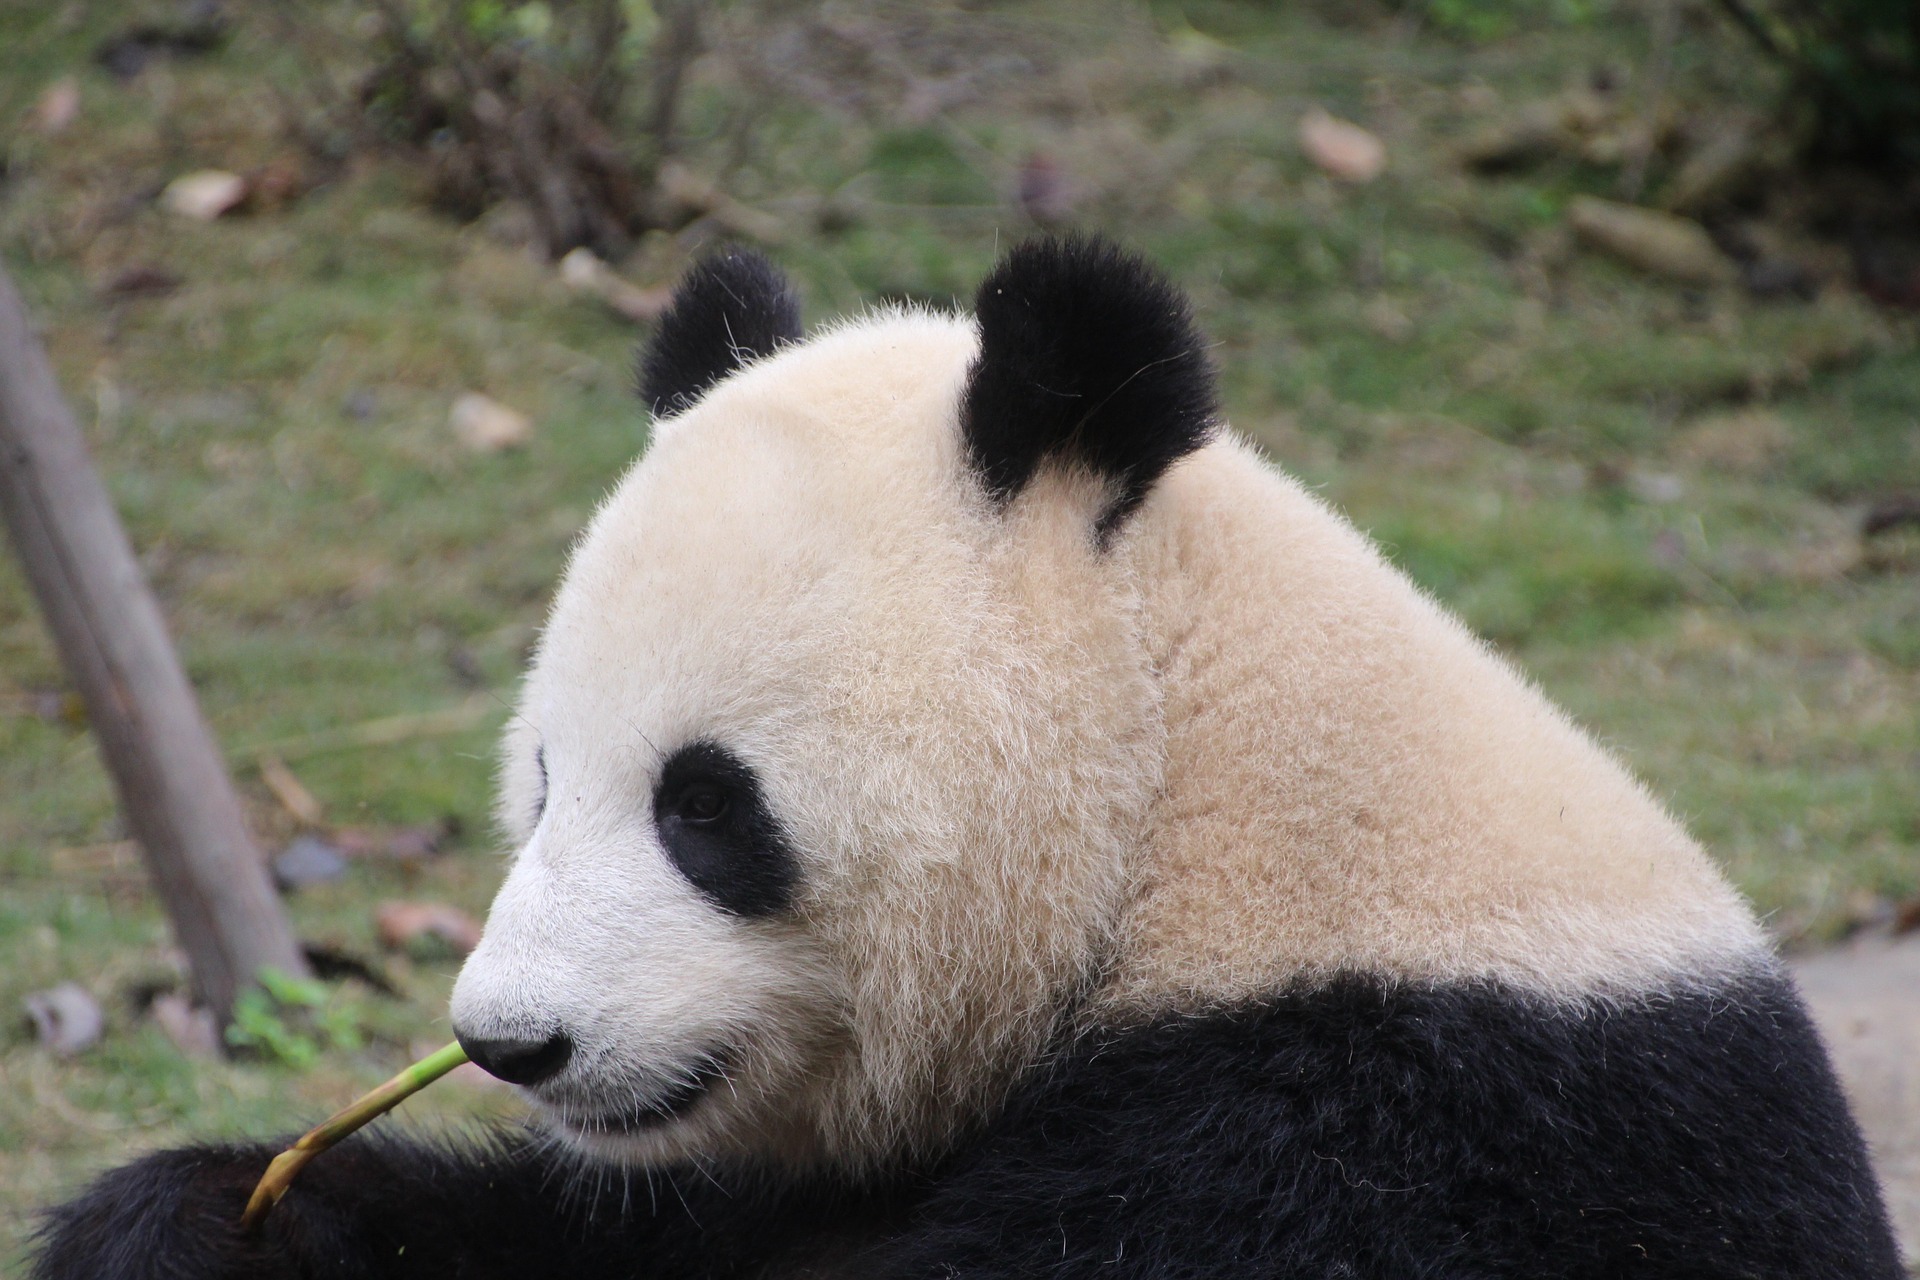 A Panda Chewing Bamboo. Panda attacks show how fearful their bite is